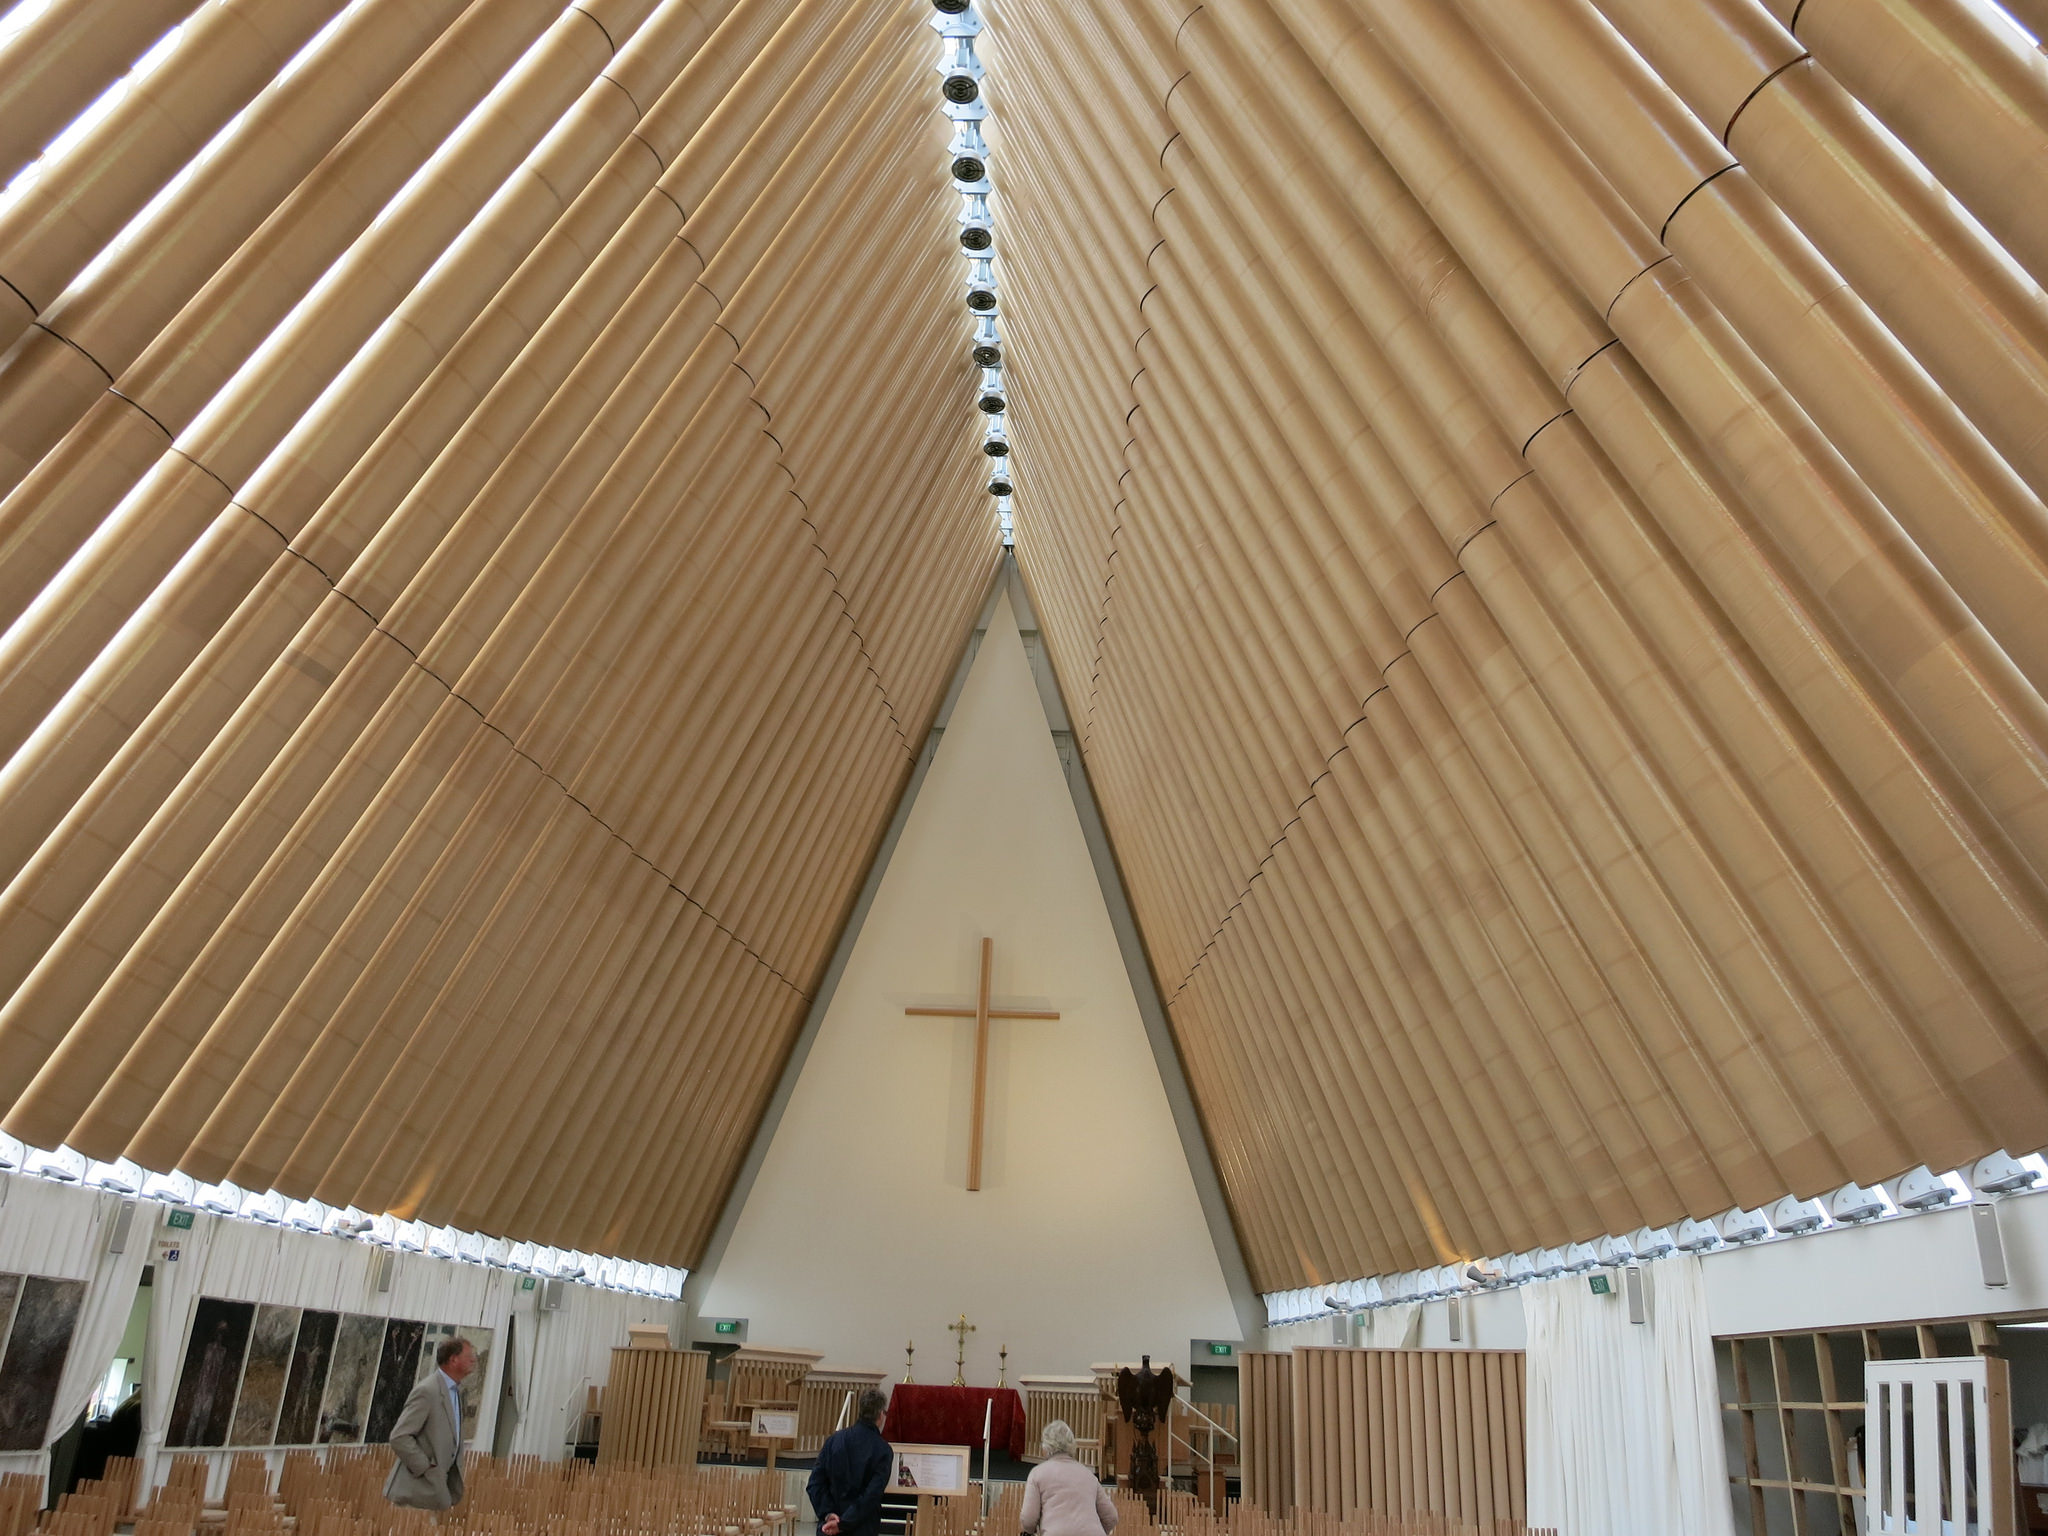 Interior of the post-2011 Christchurch Cathedral in Christchurch, New Zealand